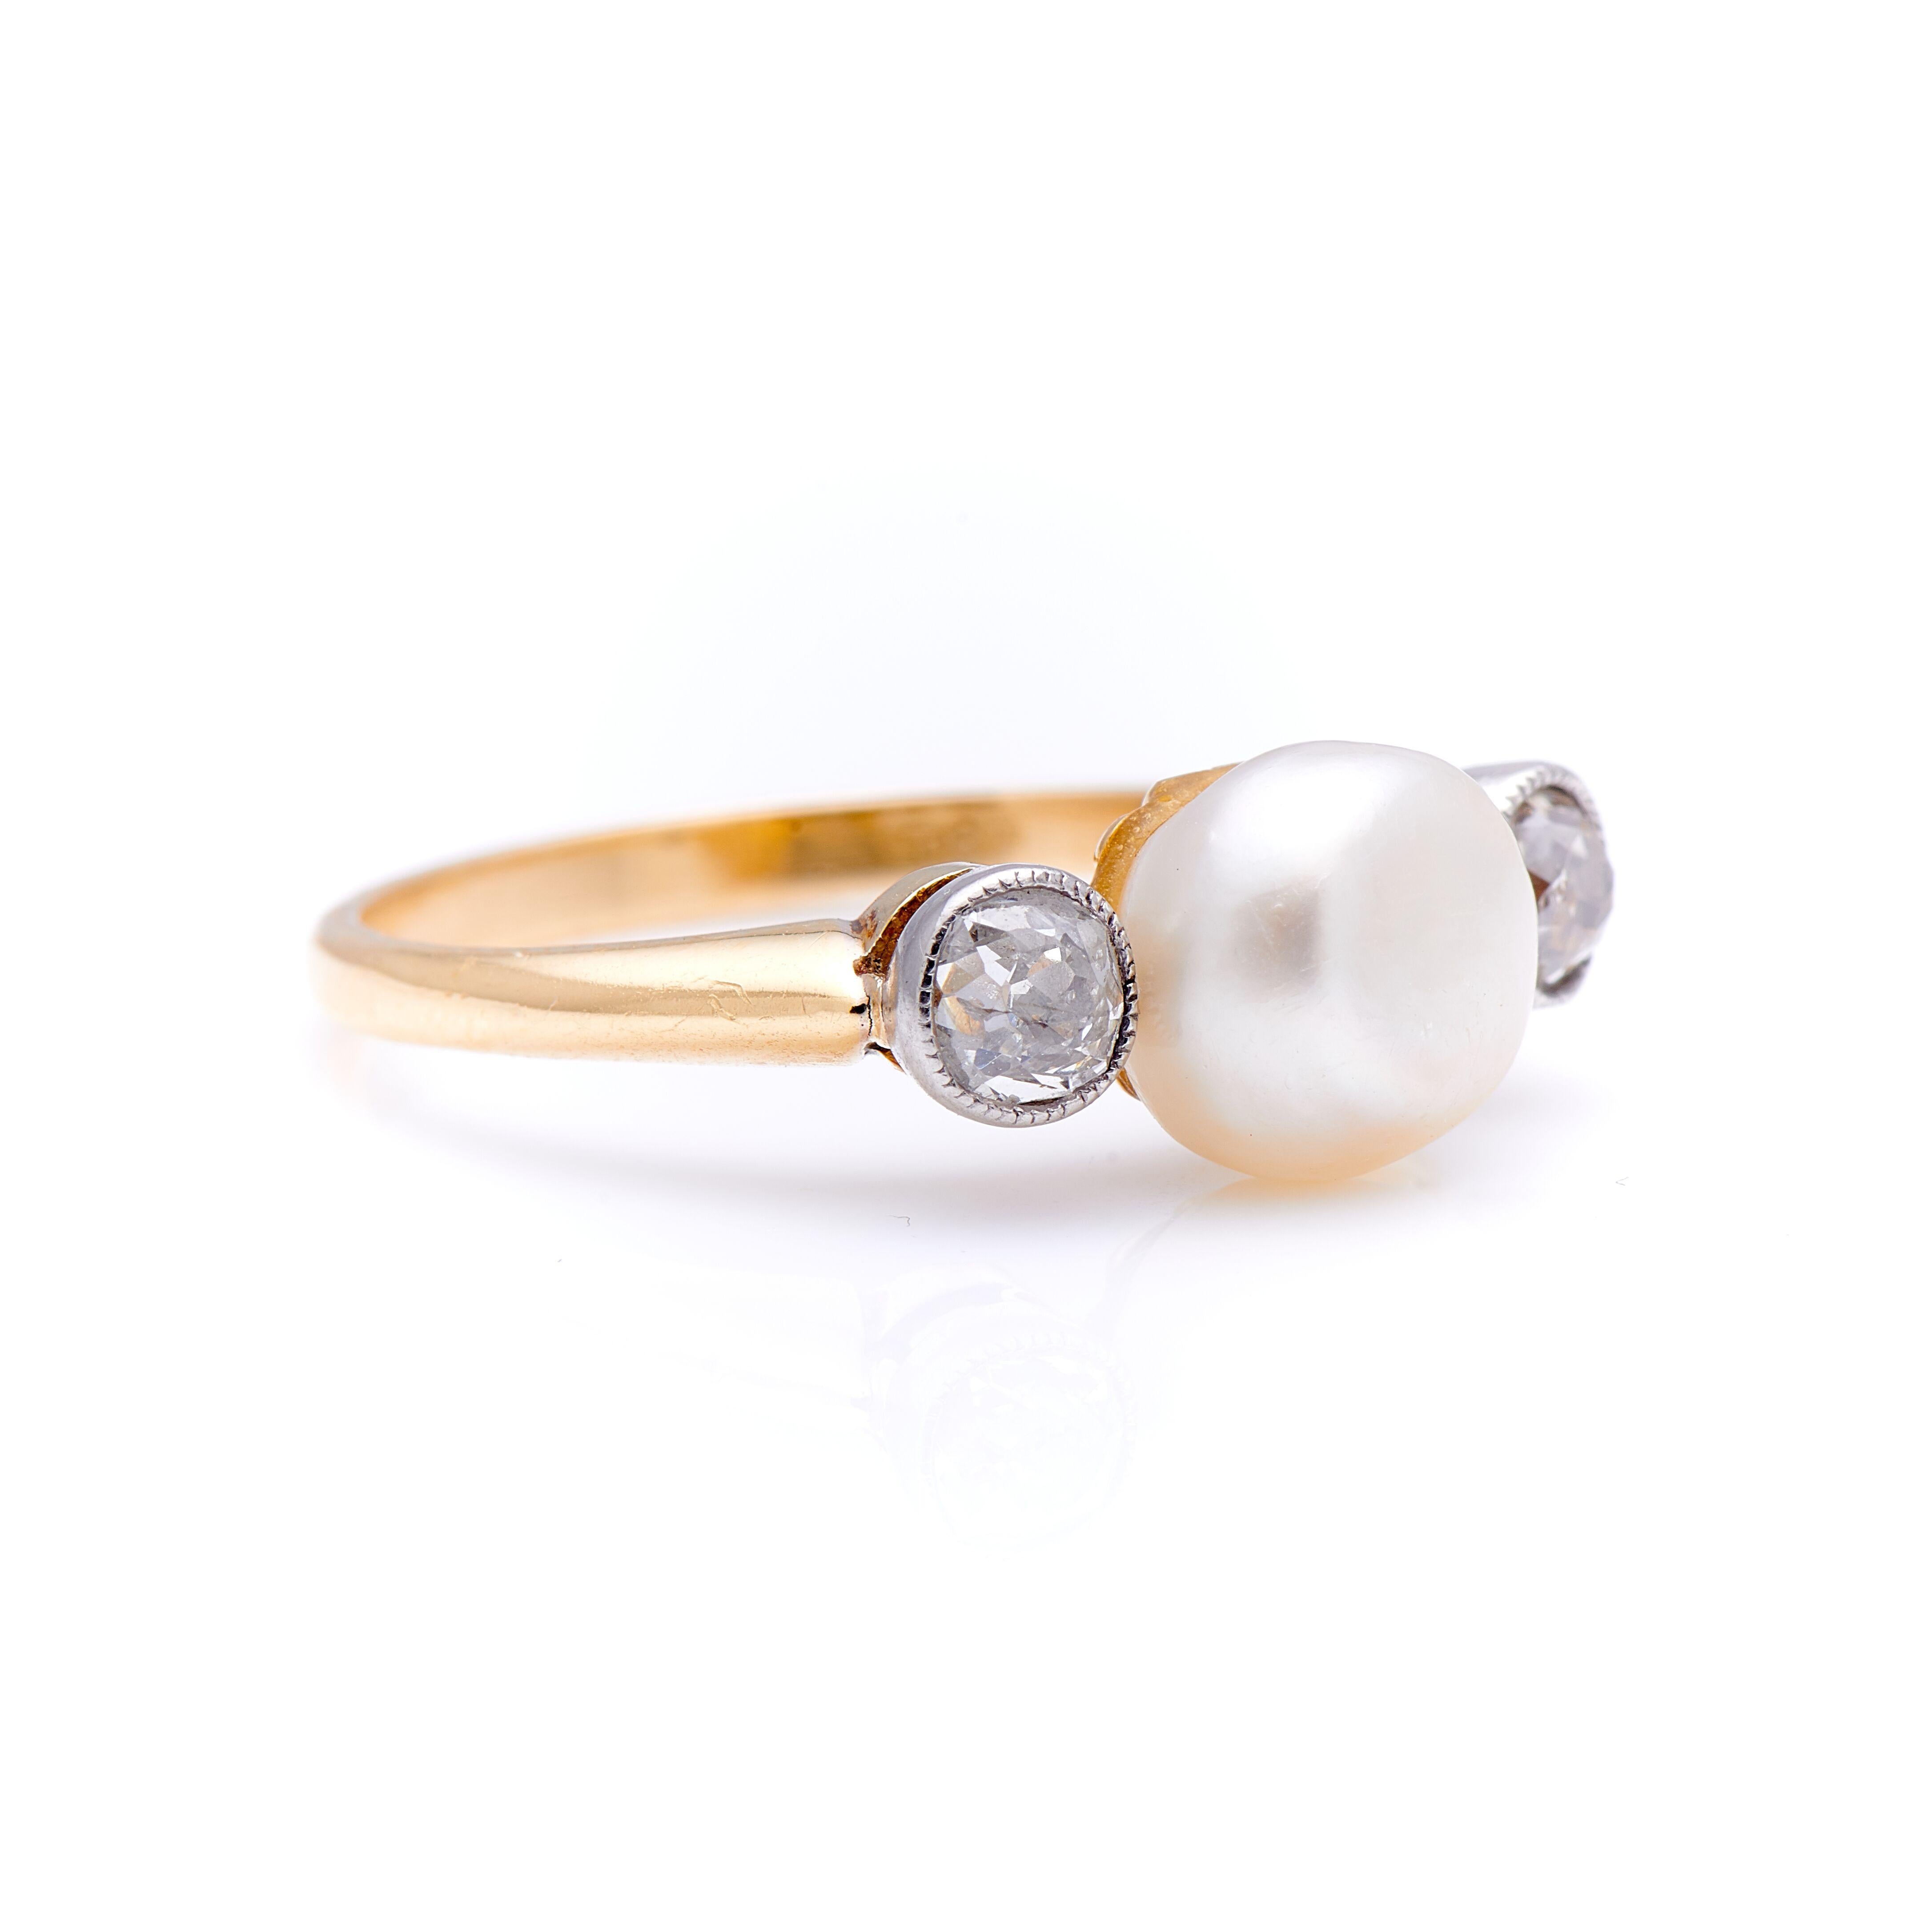 Edwardian, natural pearl and diamond three-stone ring, circa 1900. A delicately placed natural, saltwater, pearl sits centre with an perfectly irregular old-cut diamond set either side. The pearl is wonderful bouton shape with a shimmering white